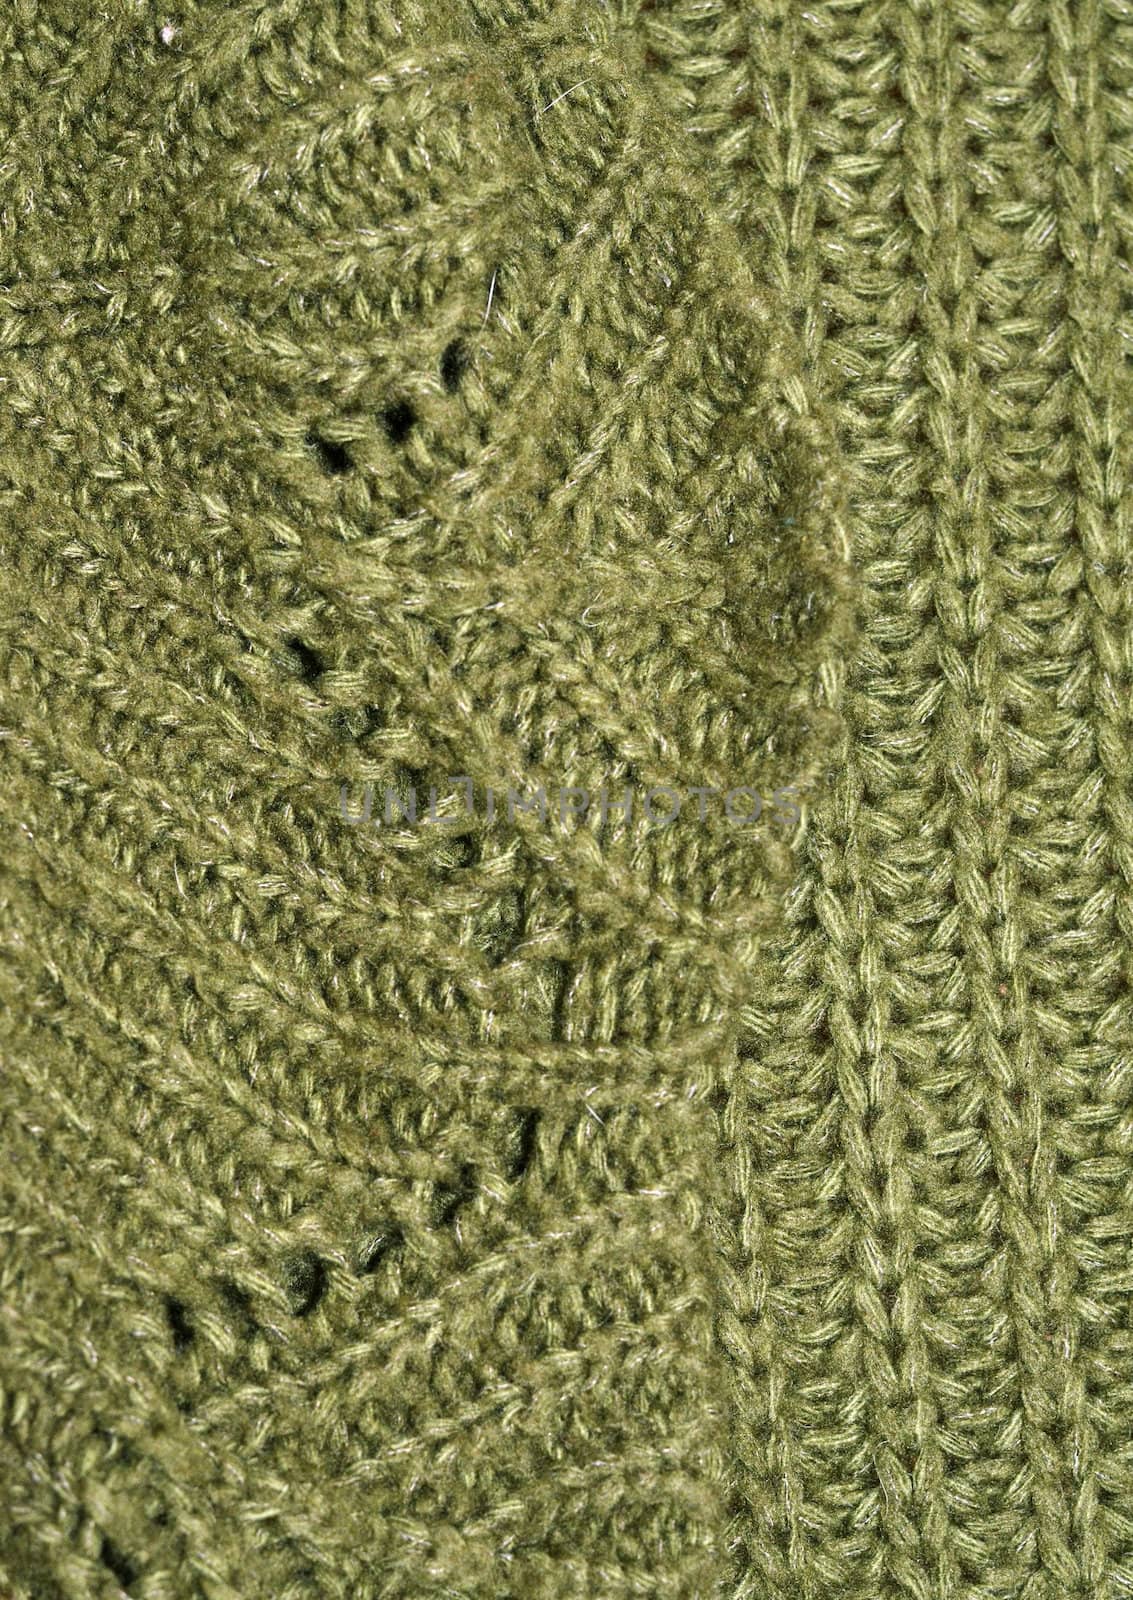 sweater structure detail by sarkao